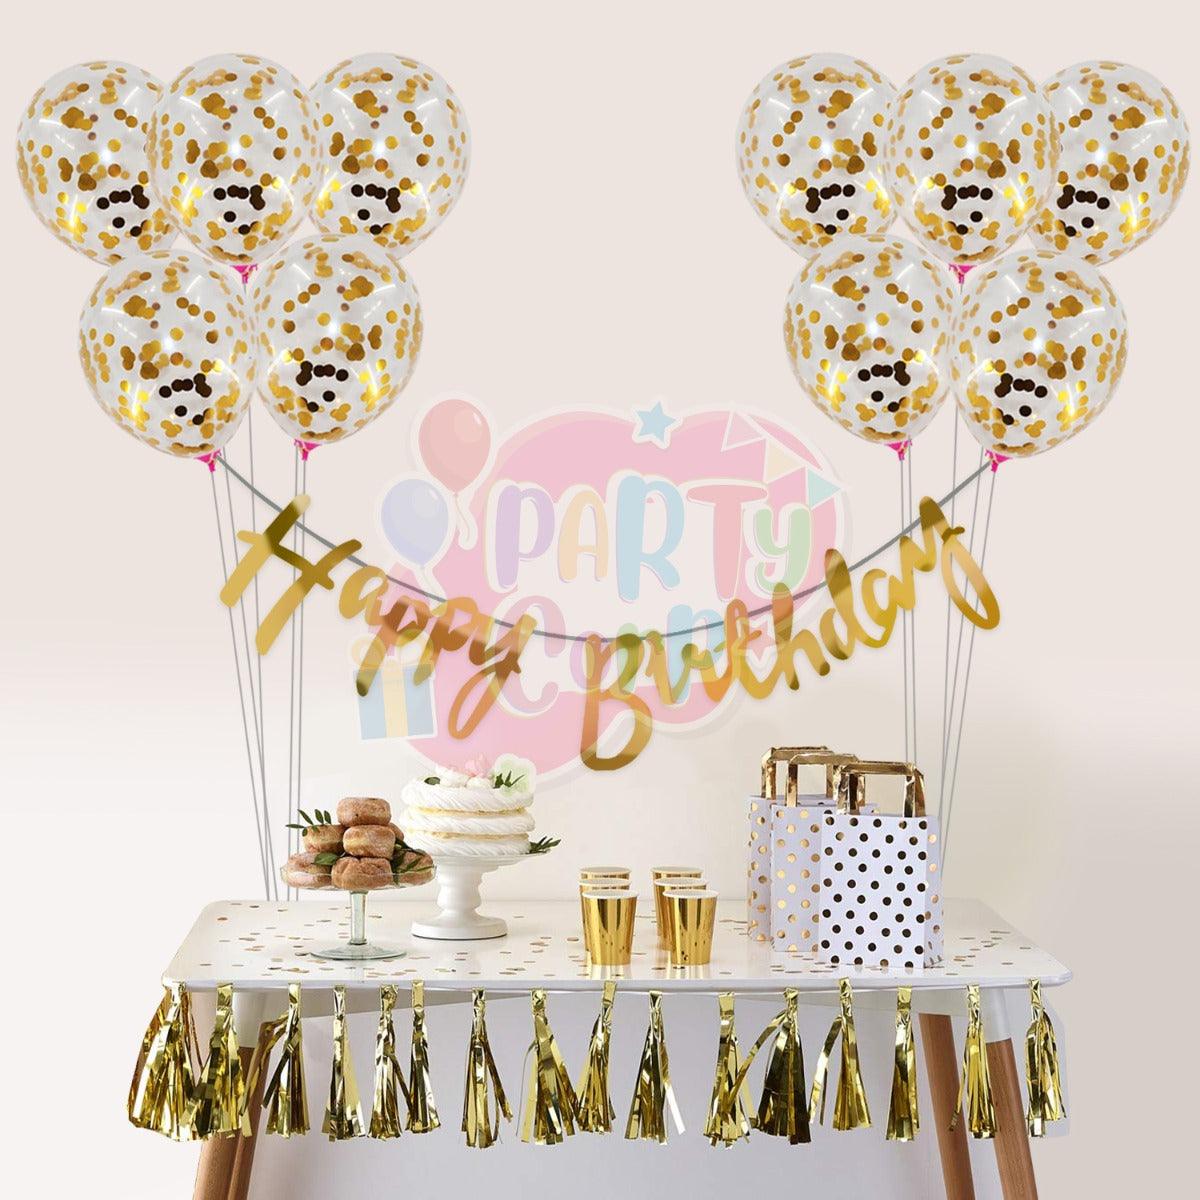 PartyCorp Happy Birthday Decoration Kit Combo 11 Pcs - Gold Confetti Balloon, Gold Happy Birthday Alphabets Cut Out Banner